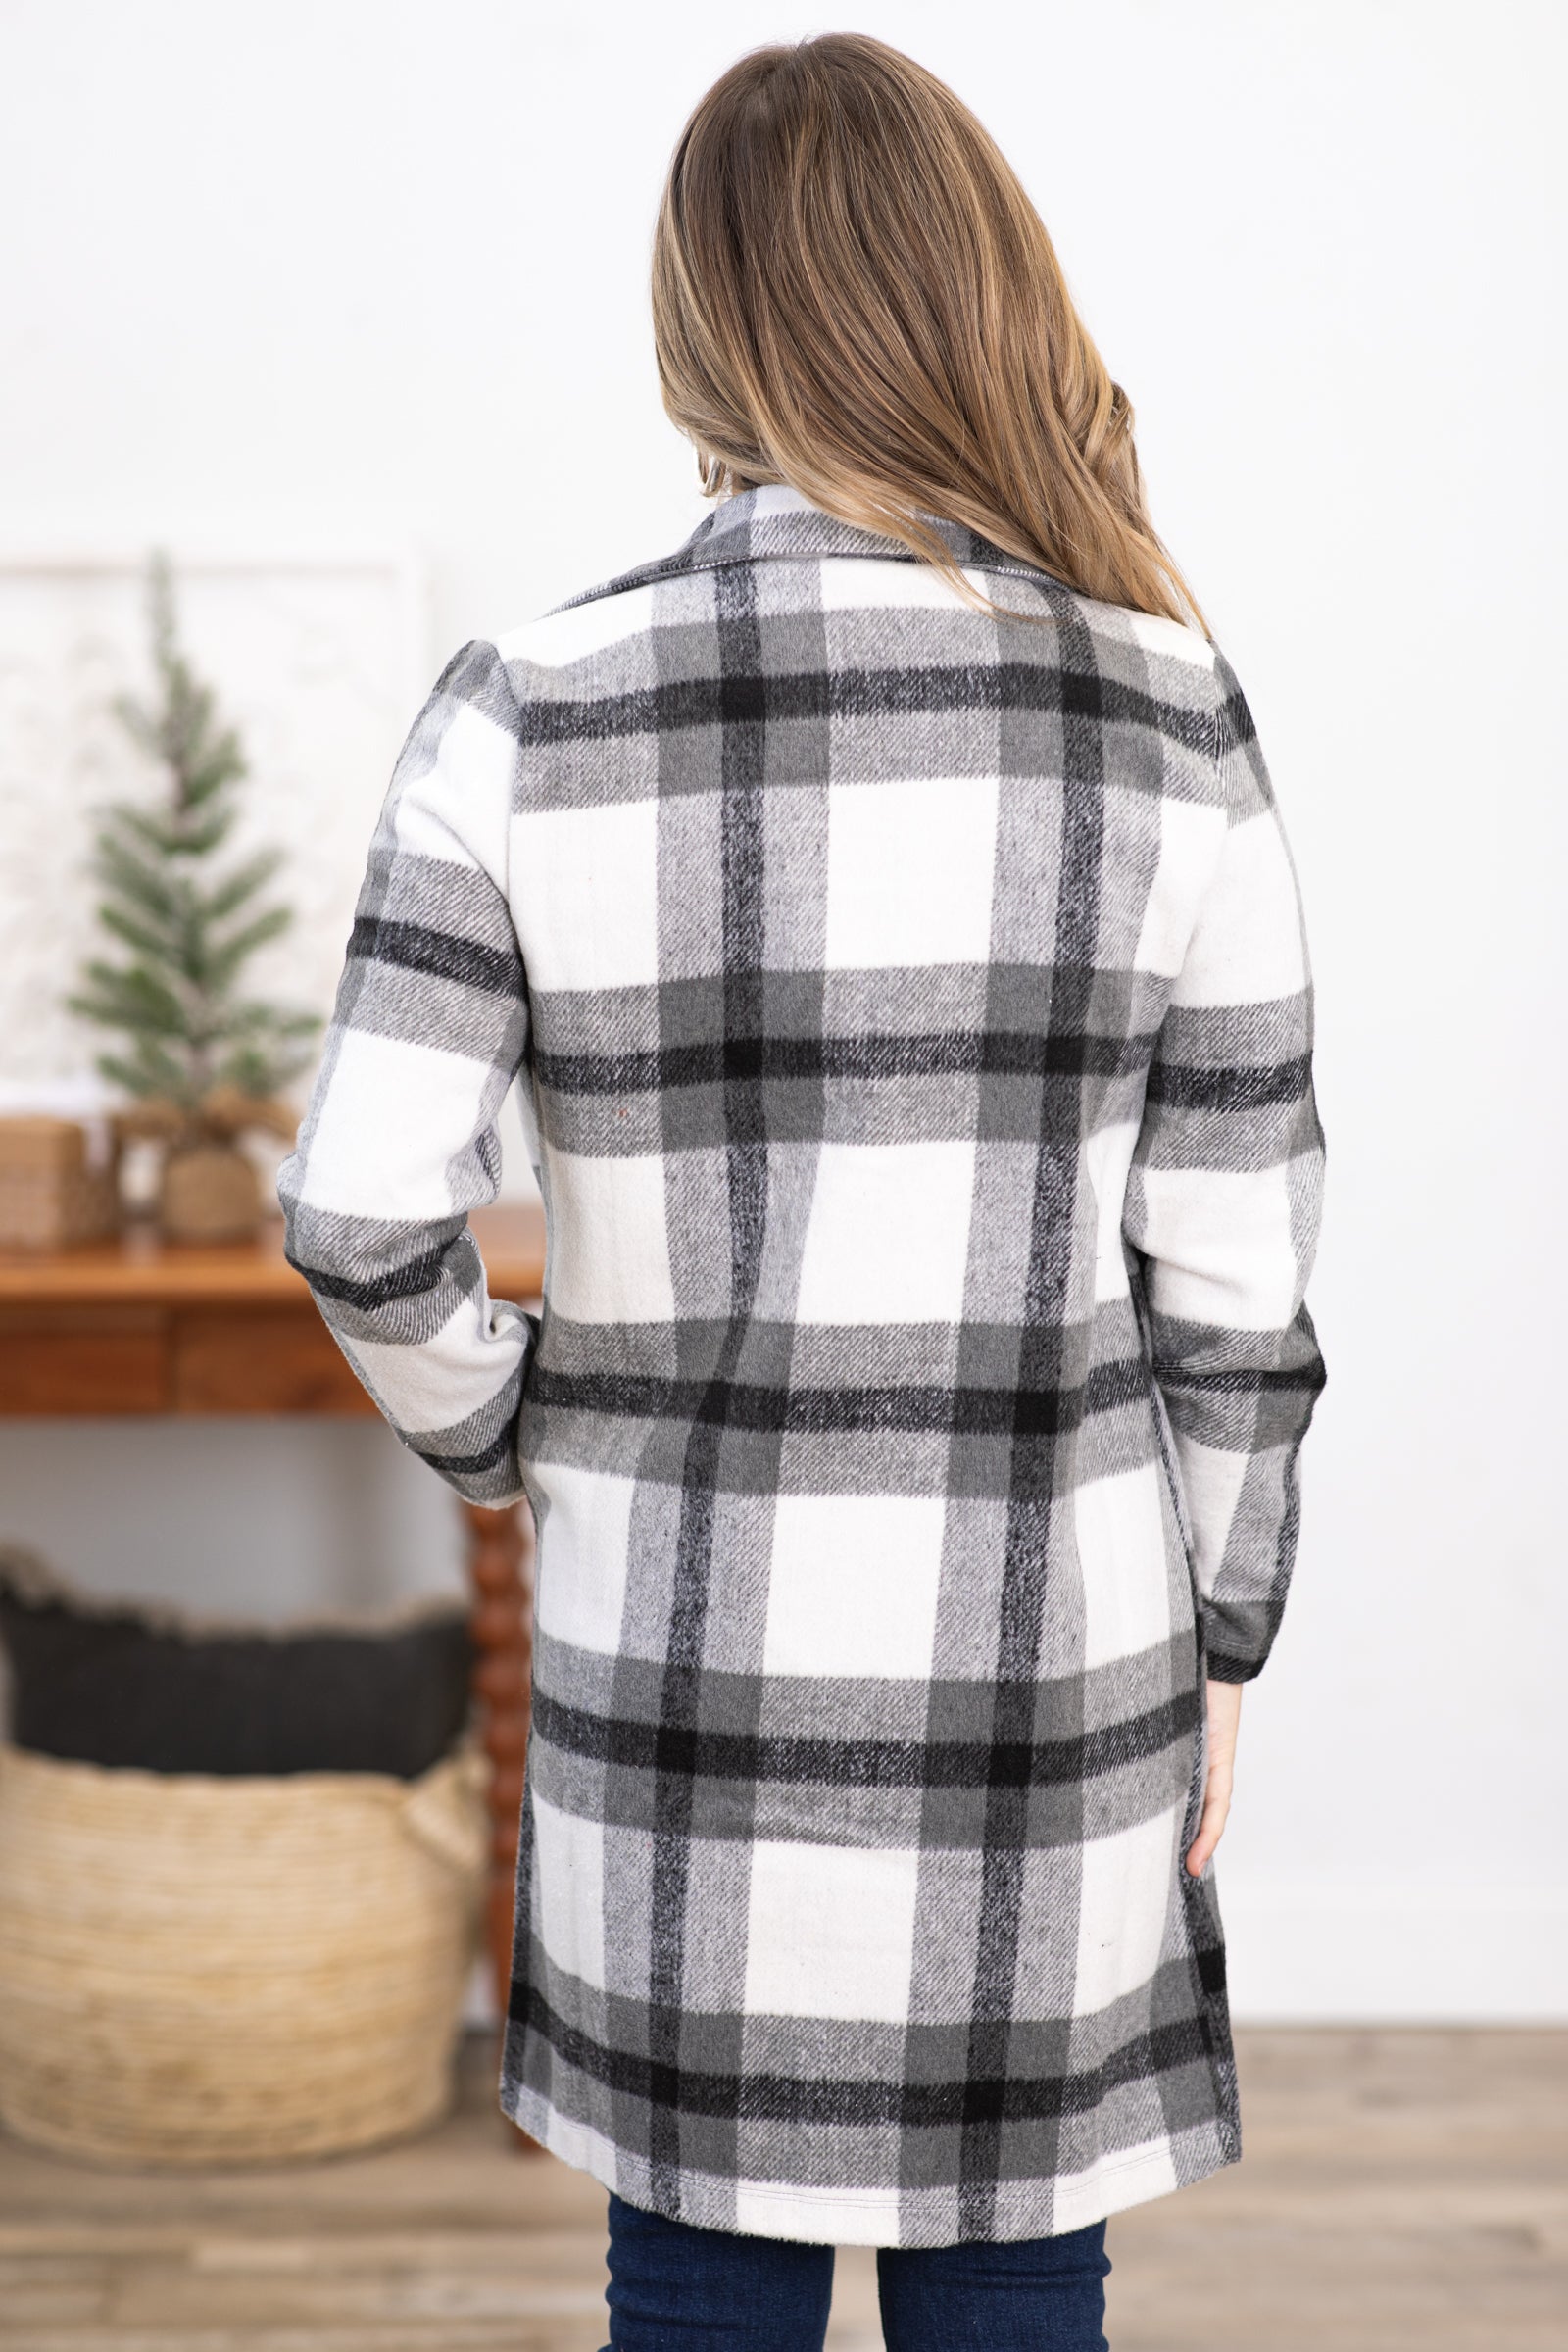 Black and White Plaid Single Breasted Jacket